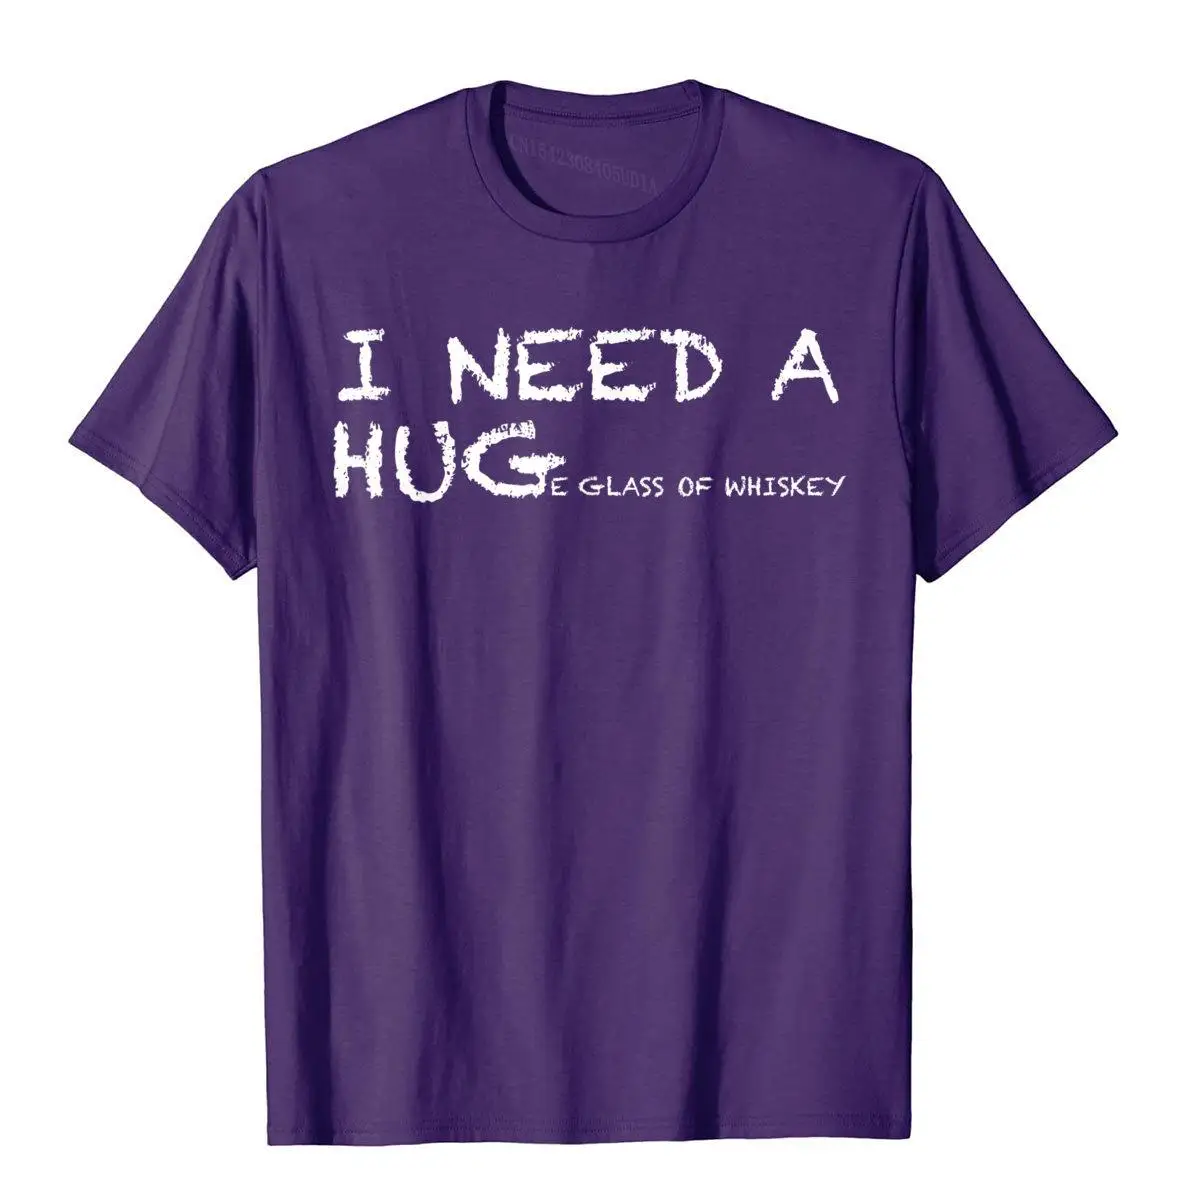 Funny Whiskey T Shirt I Need A Huge Glass of Whiskey T-Shirt__A11854purple